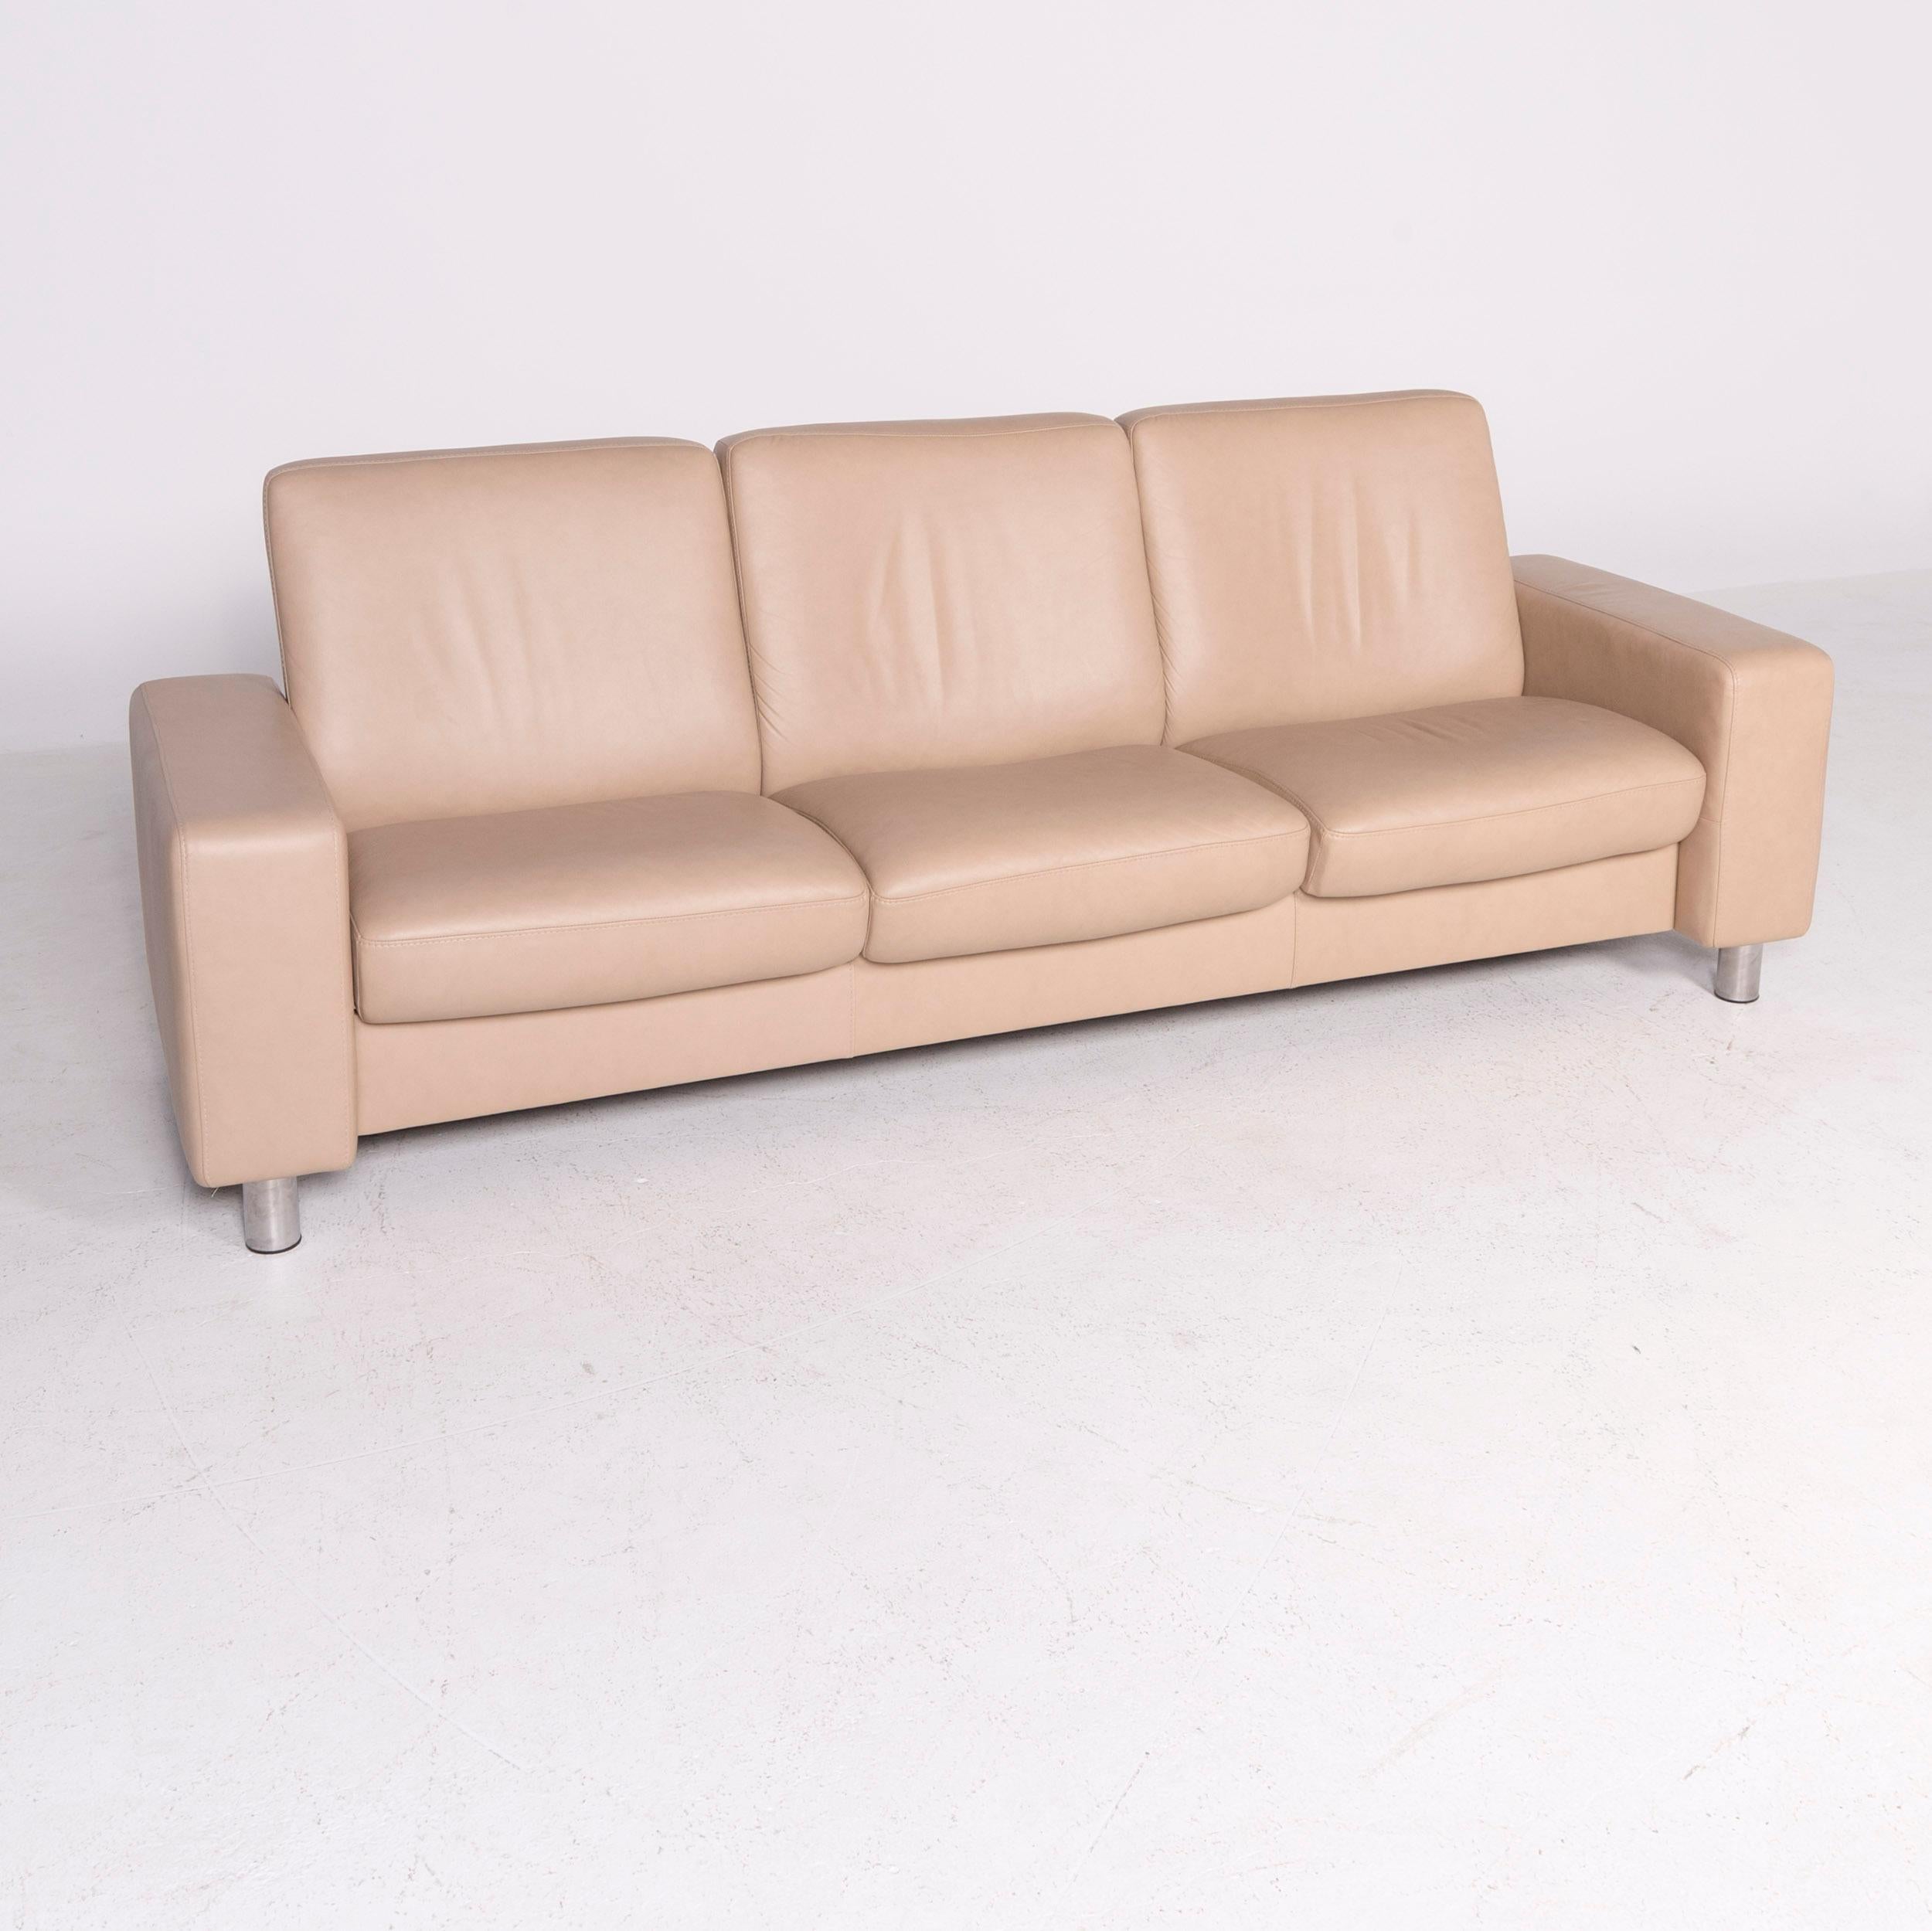 We bring to you a Stressless designer leather sofa beige genuine leather three-seat couch.

Product measurements in centimeters:

Depth 78
Width 233
Height 84
Seat-height 42
Rest-height 55
Seat-depth 42
Seat-width 191
Back-height 47.
  